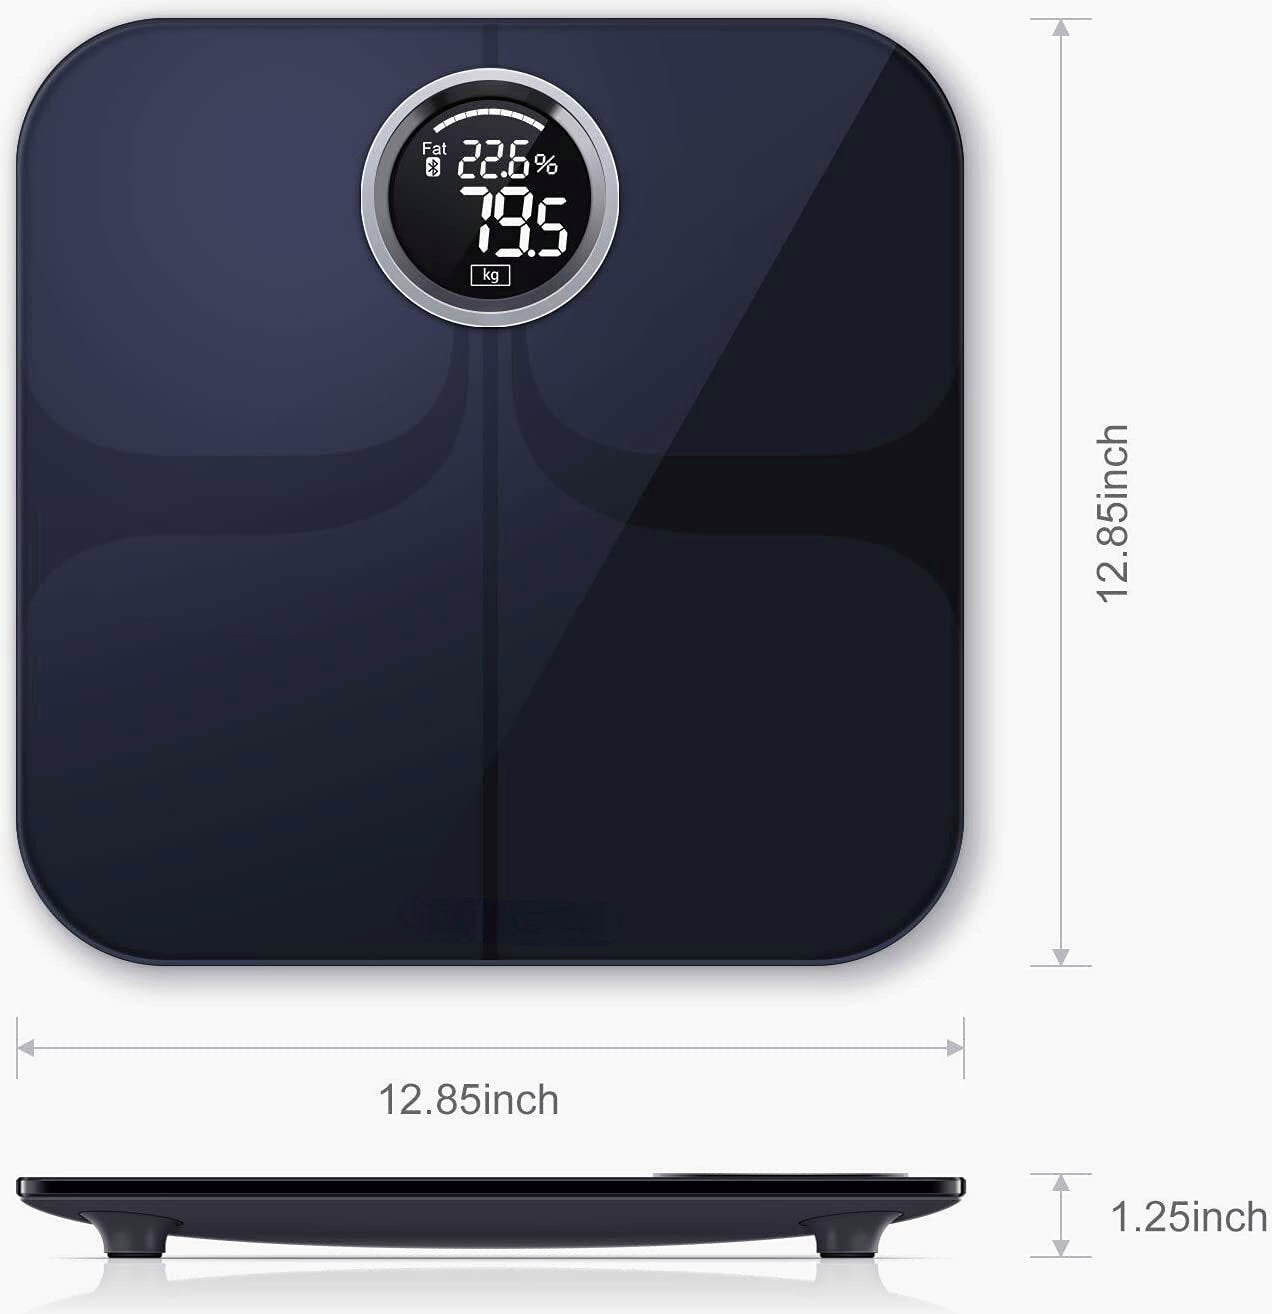 Premium Smart Scale Body Fat Scale Body Composition Monitor With Extra Large Display Works With APP Apple Health And Google Fit